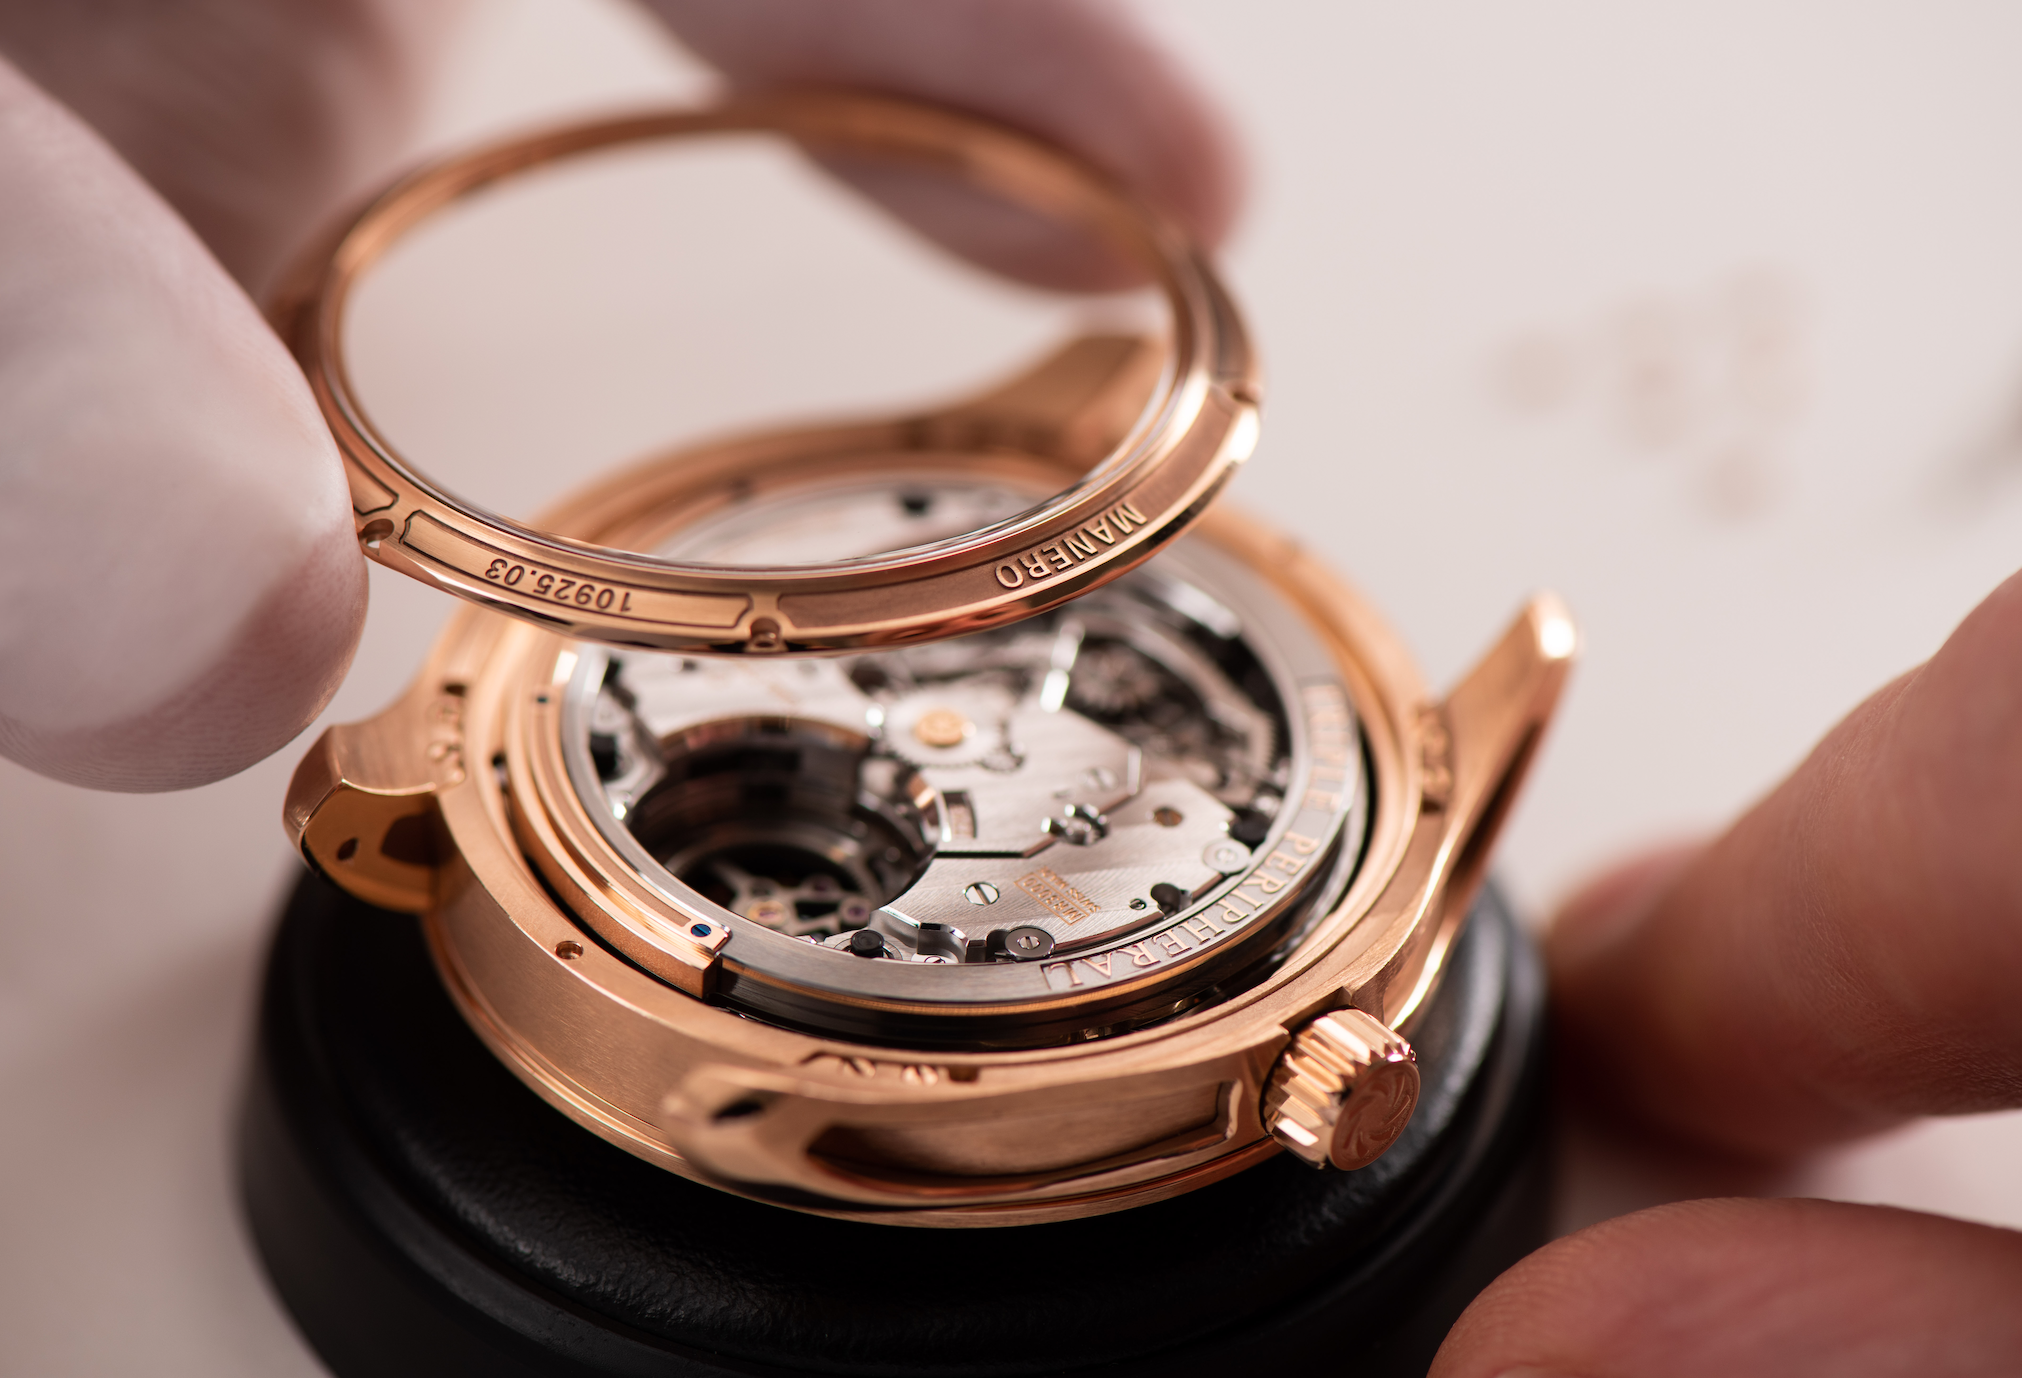 The Manero Minute Repeater Symphony